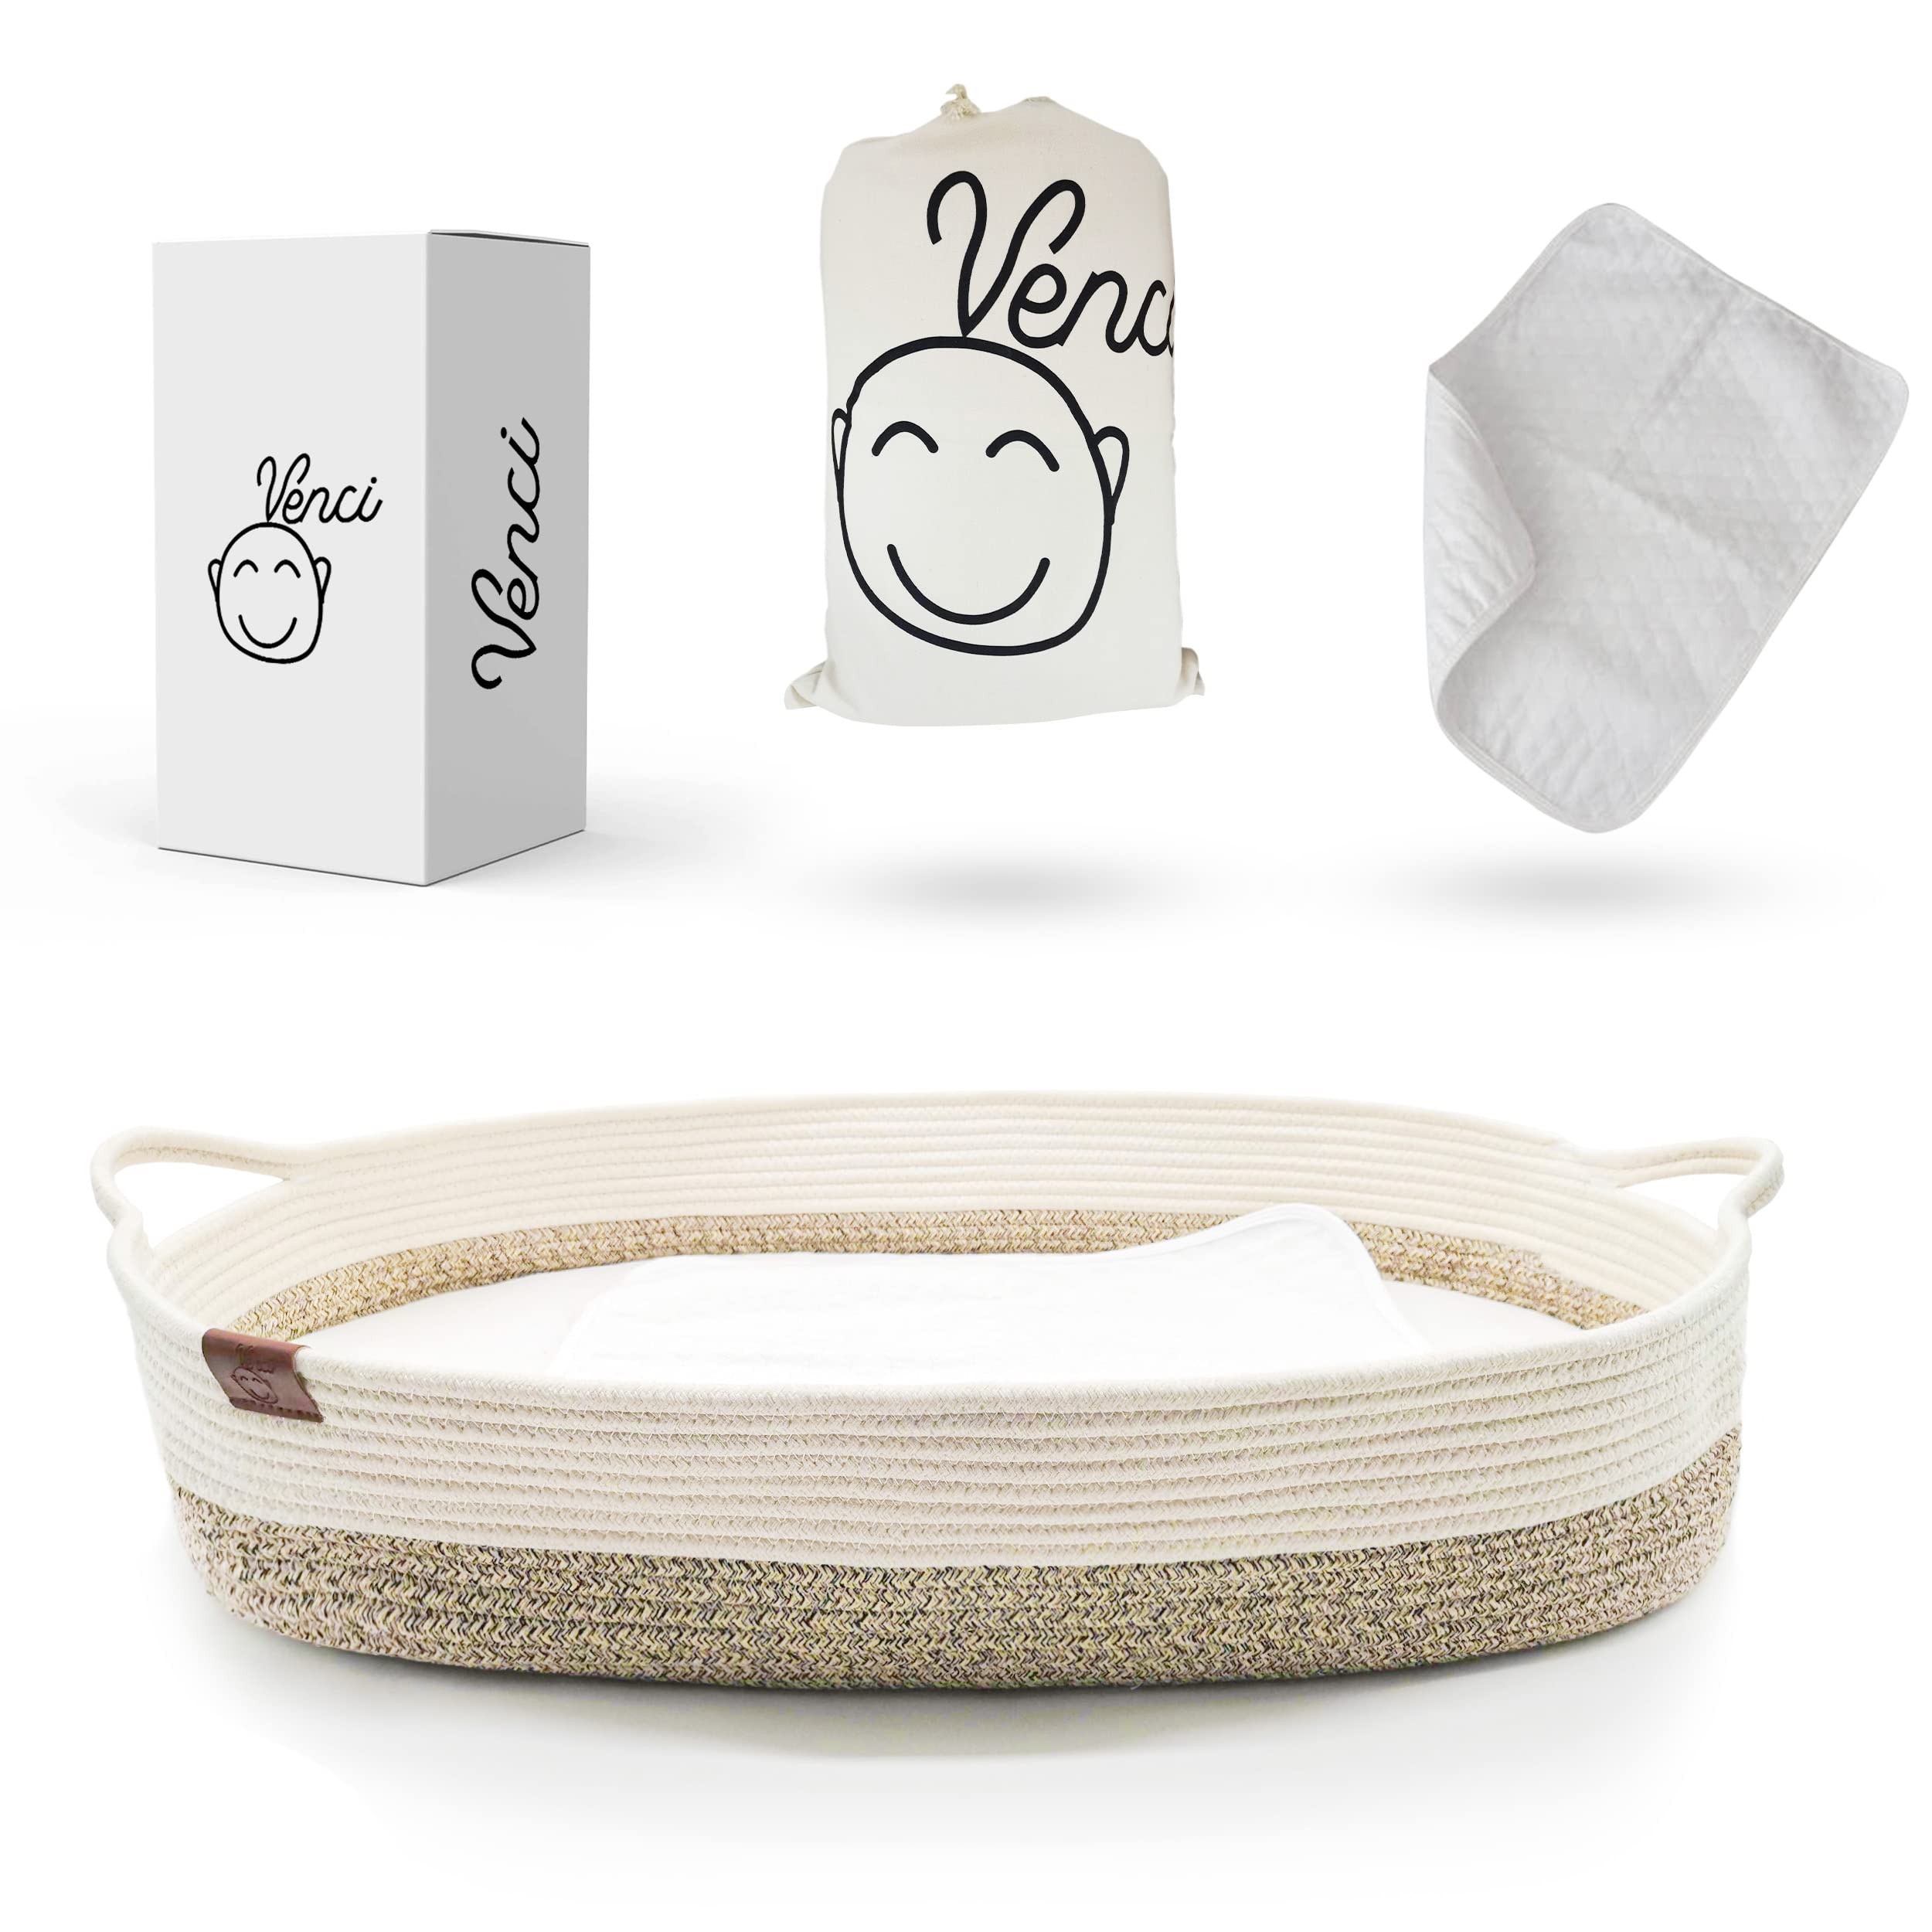 Baby Changing Basket for Dresser Top - 29.5 x 17 x 6 in, Organic Cotton Rope and Thick Removable Foam Pad, Portable Moses Basket Changing Basket for Babies, Waterproof Changing Pad